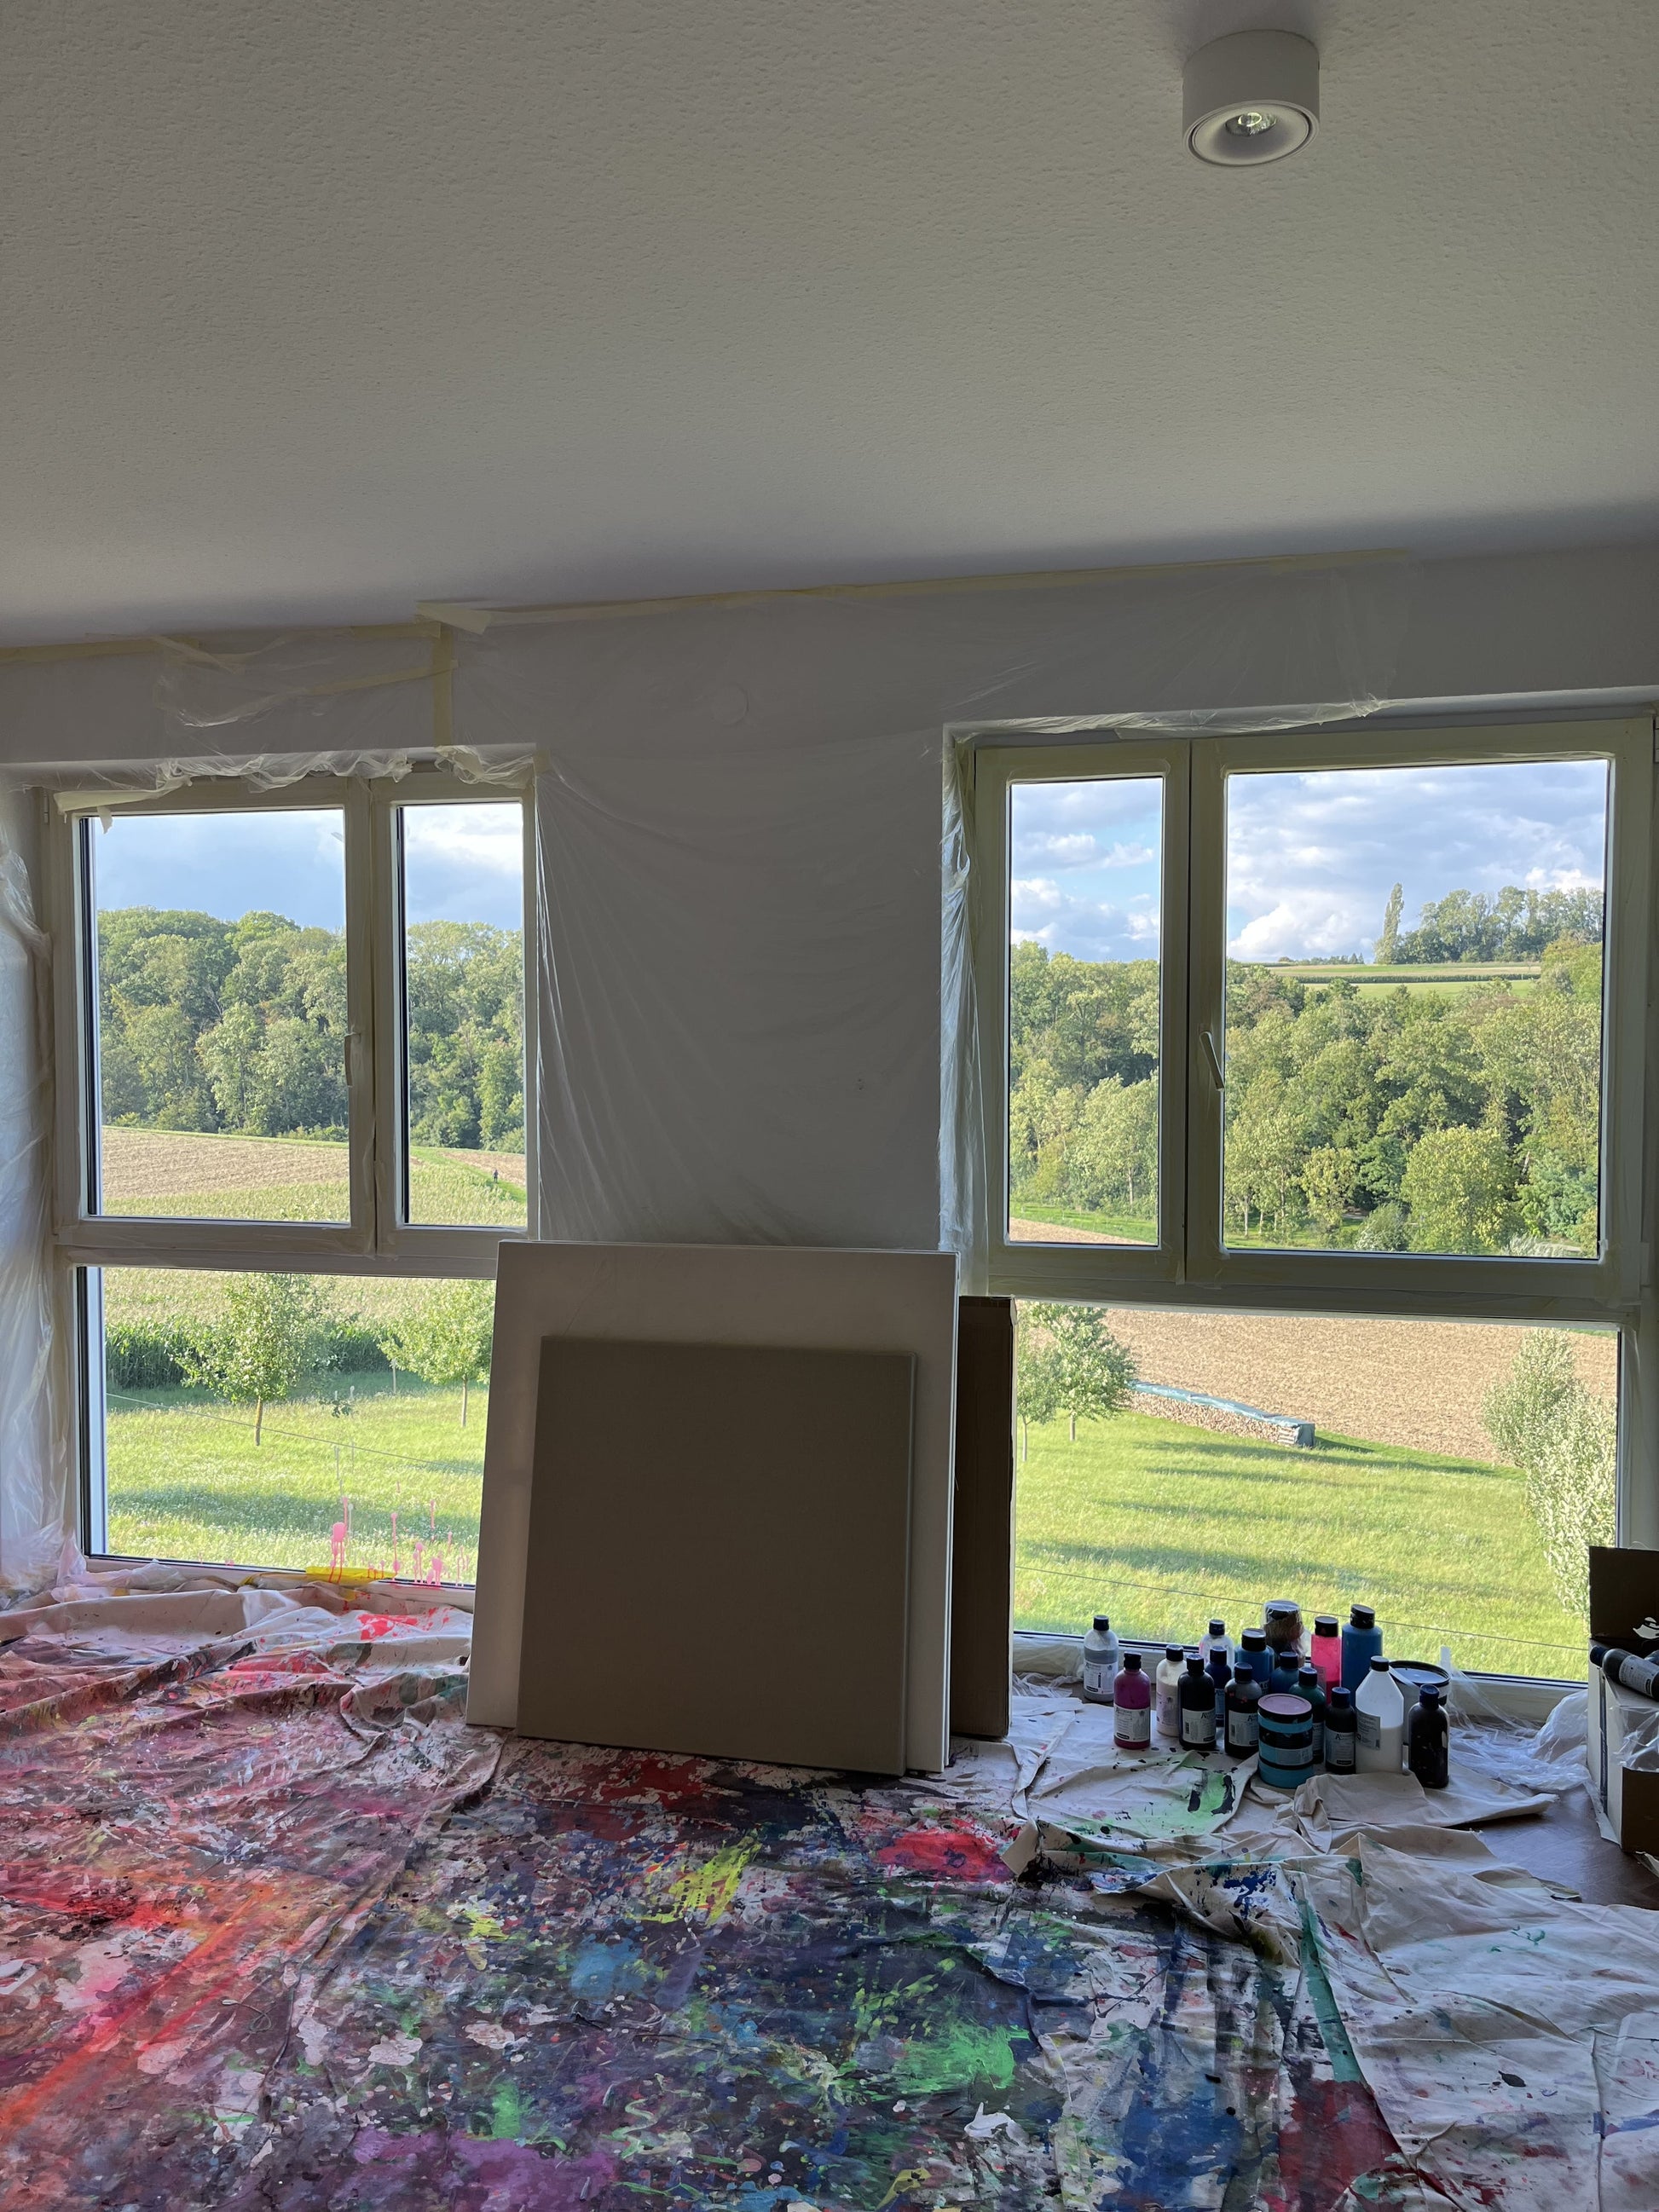 "What you see is what you get" Painting Workshop with Janine in Bietigheim-Bissingen, Germany